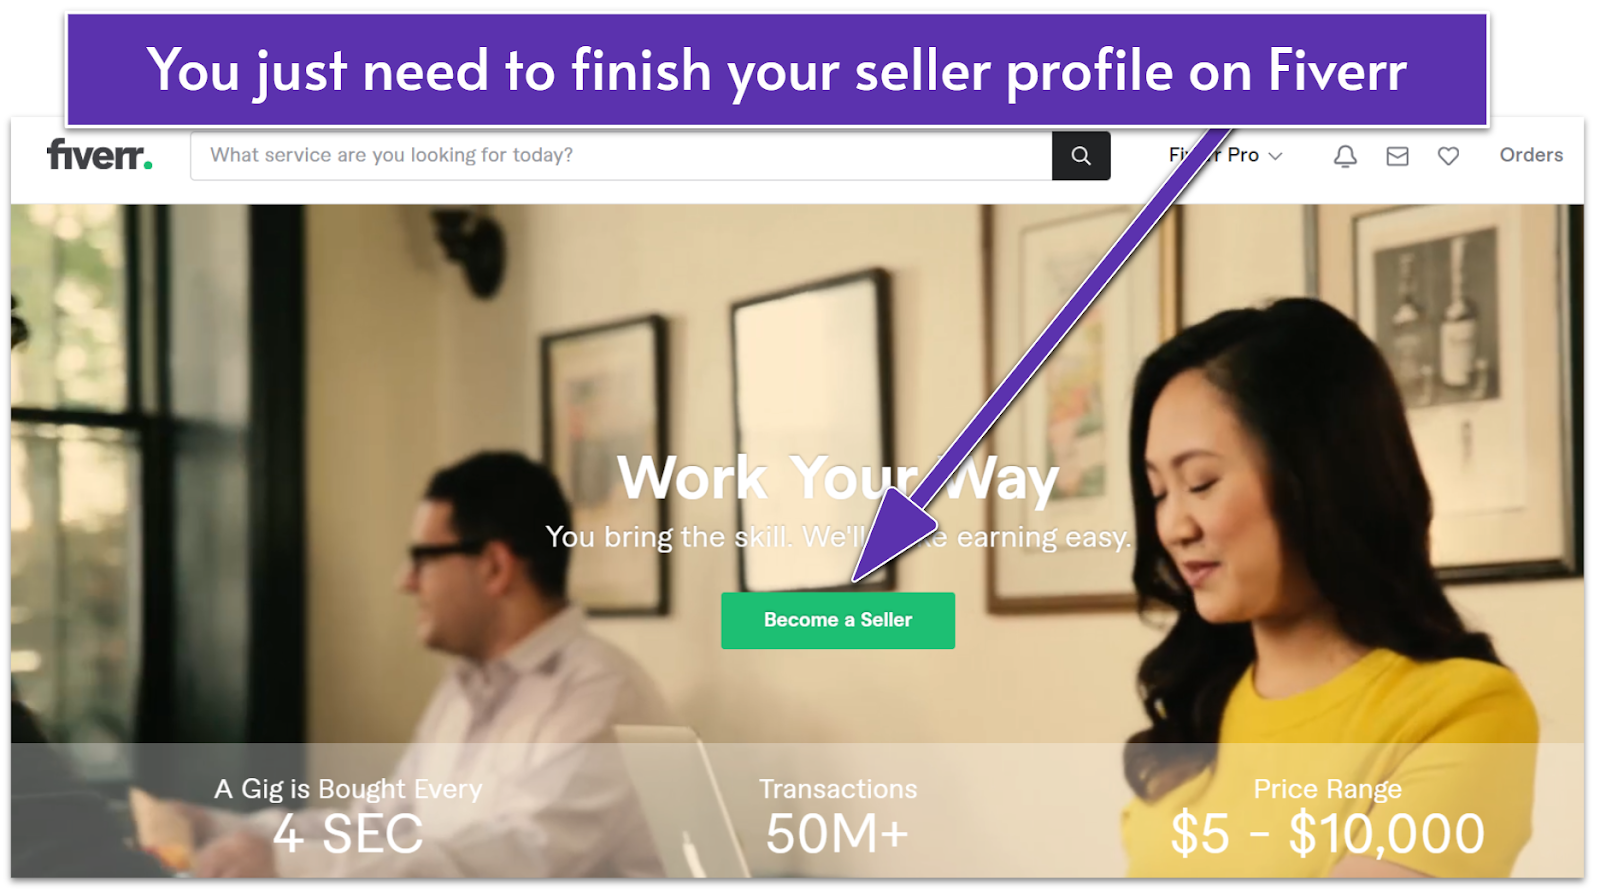 Fiverr's homepage after you sign up